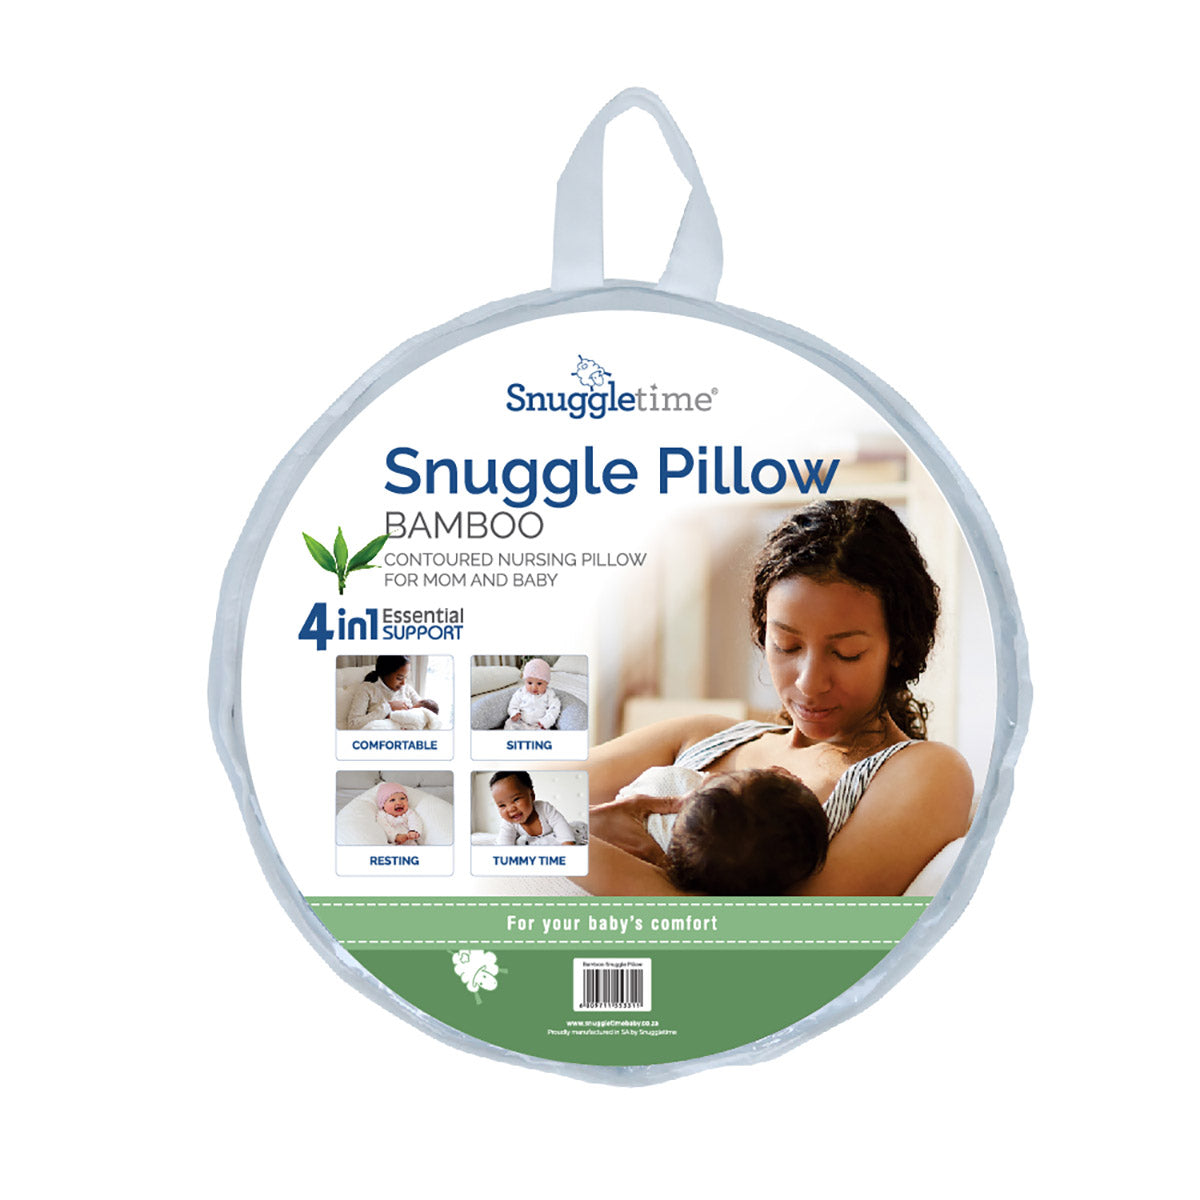 Snuggletime Bamboo Snuggle Up Pillow